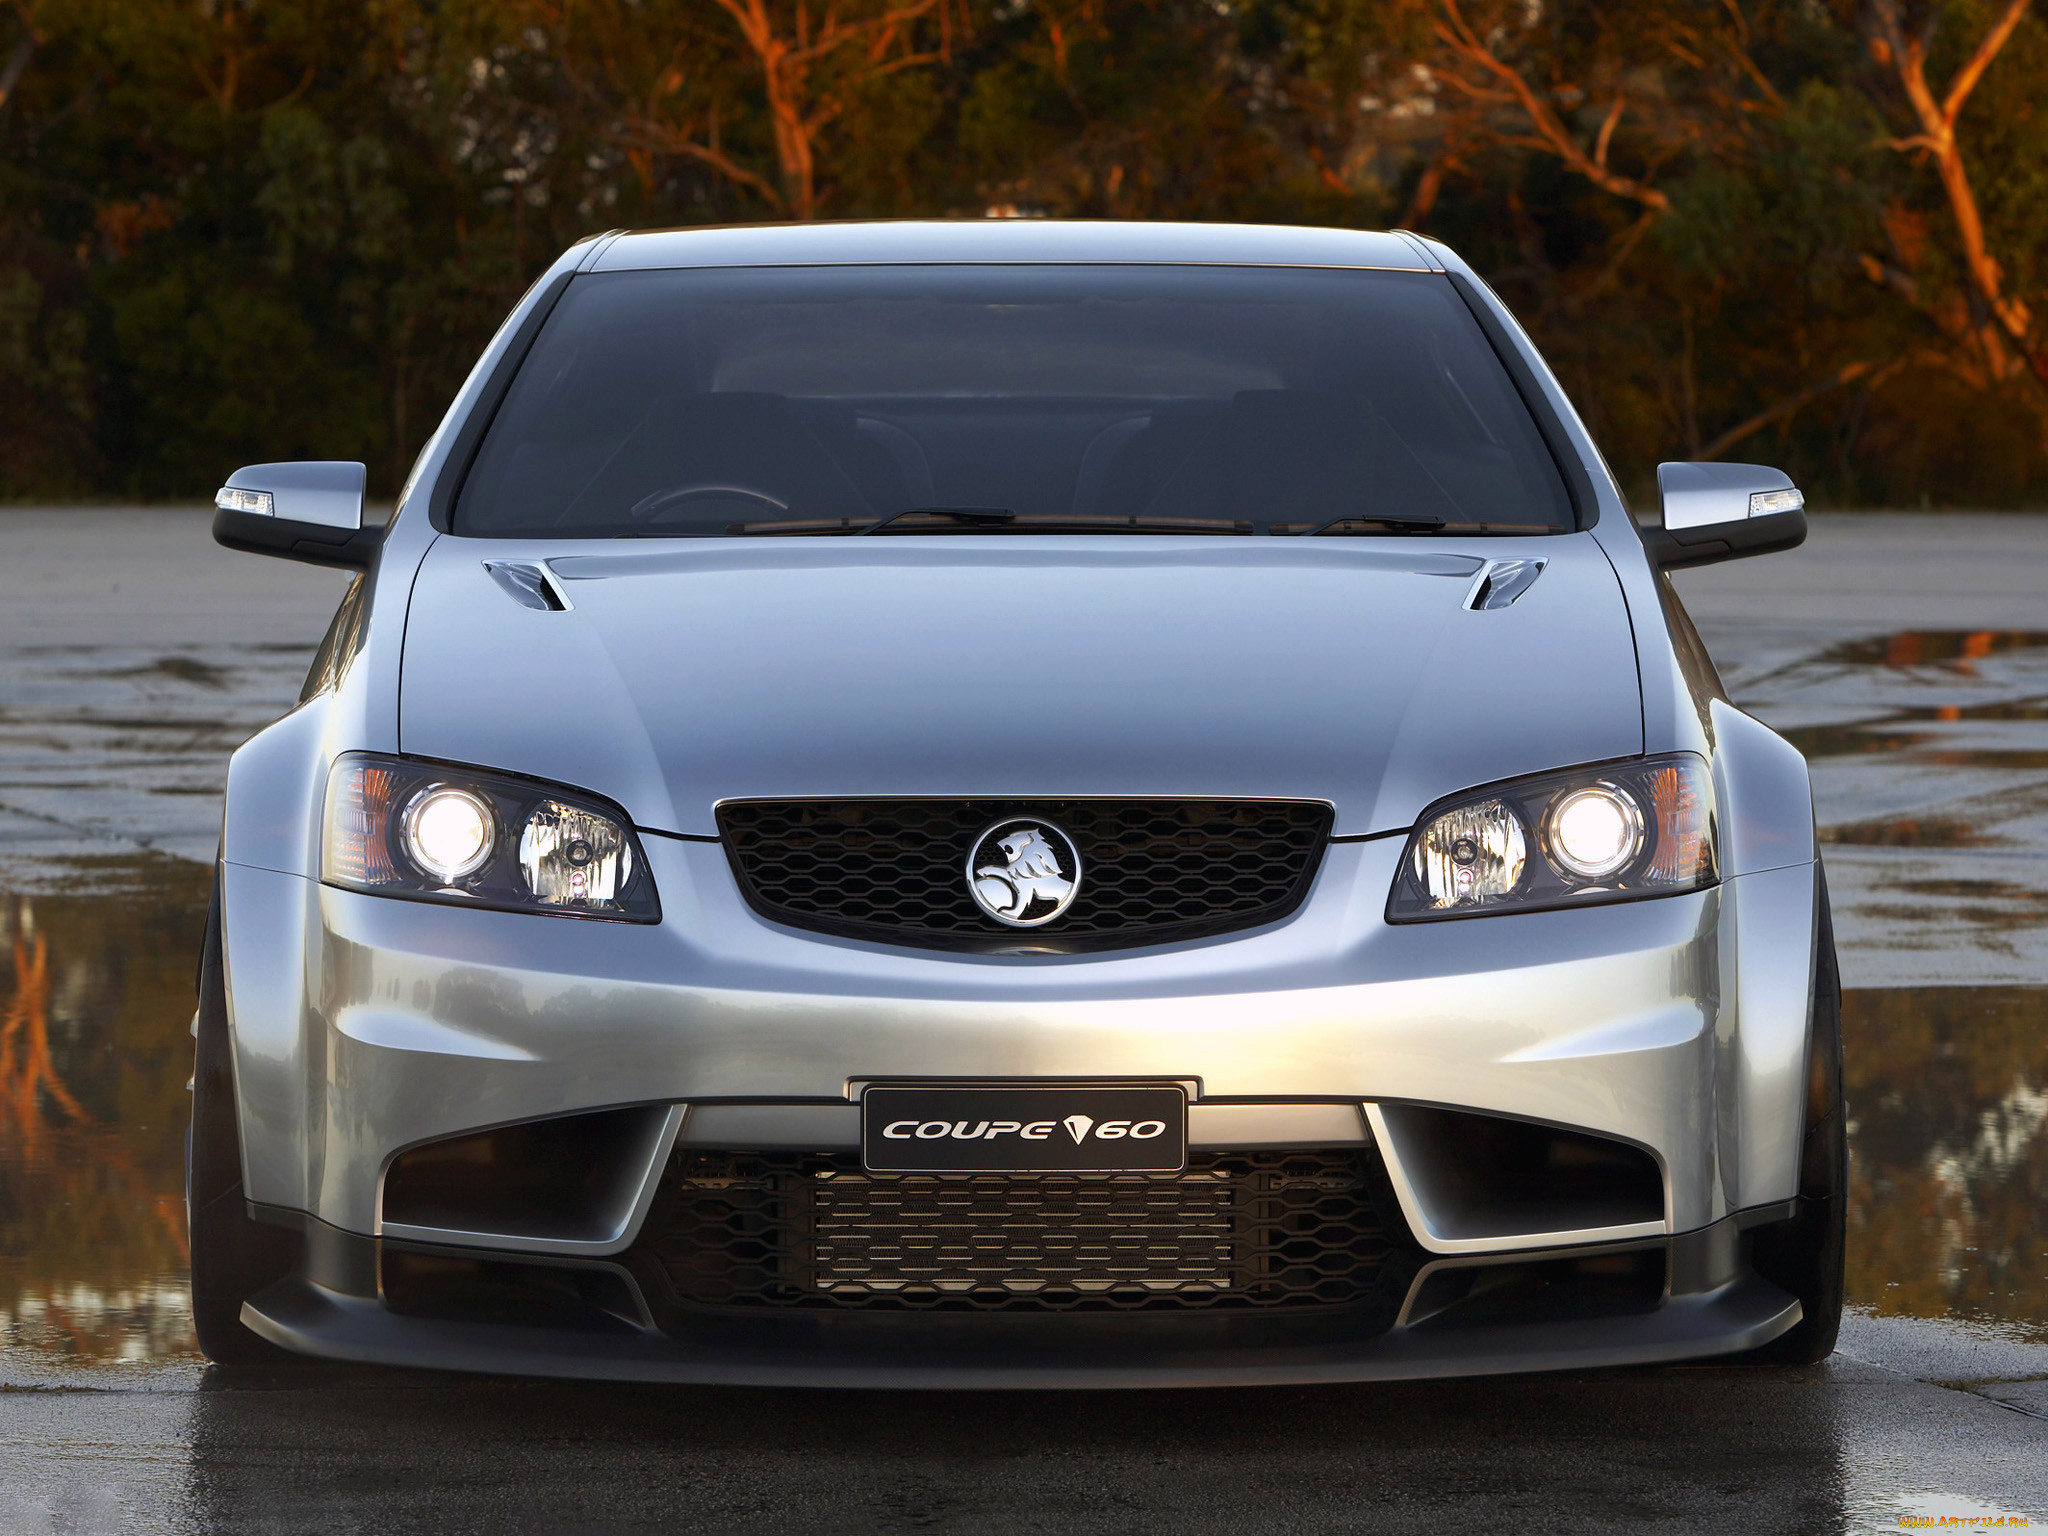 holden coupe-60 concept 2008, , holden, concept, 2008, coupe-60